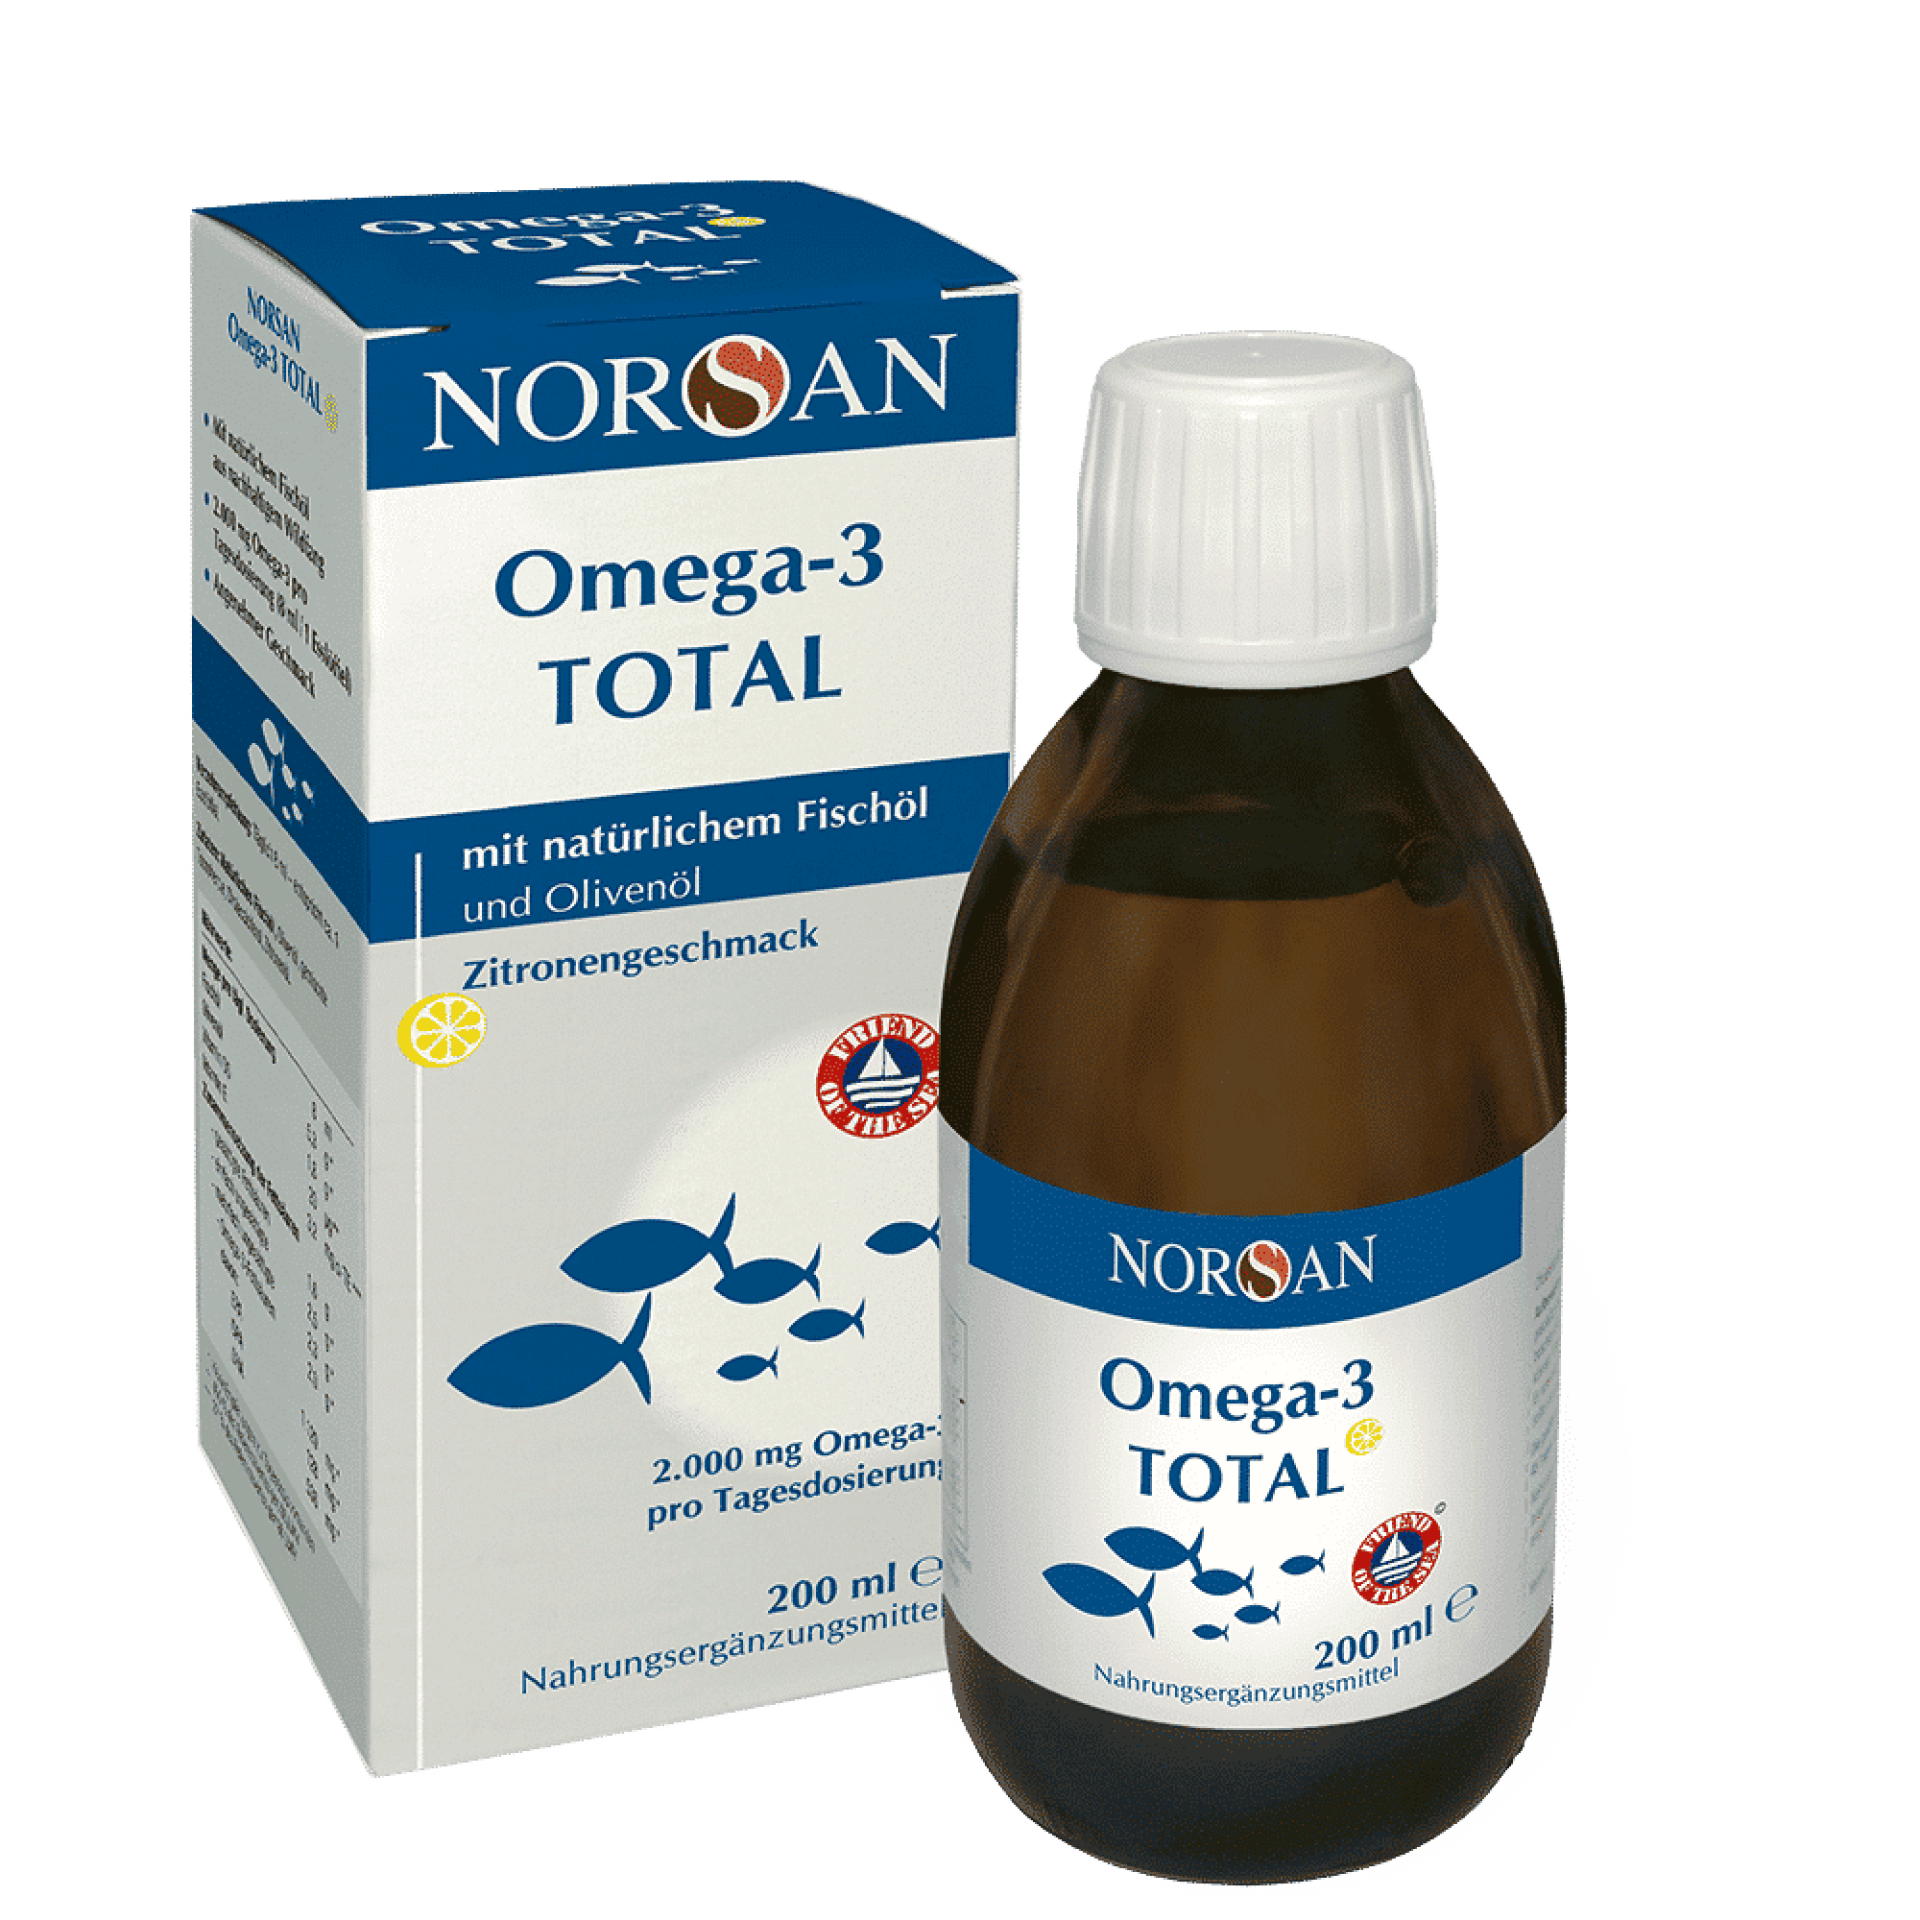 Norsan Omega-3 Total Oel Flasche und Verpackung